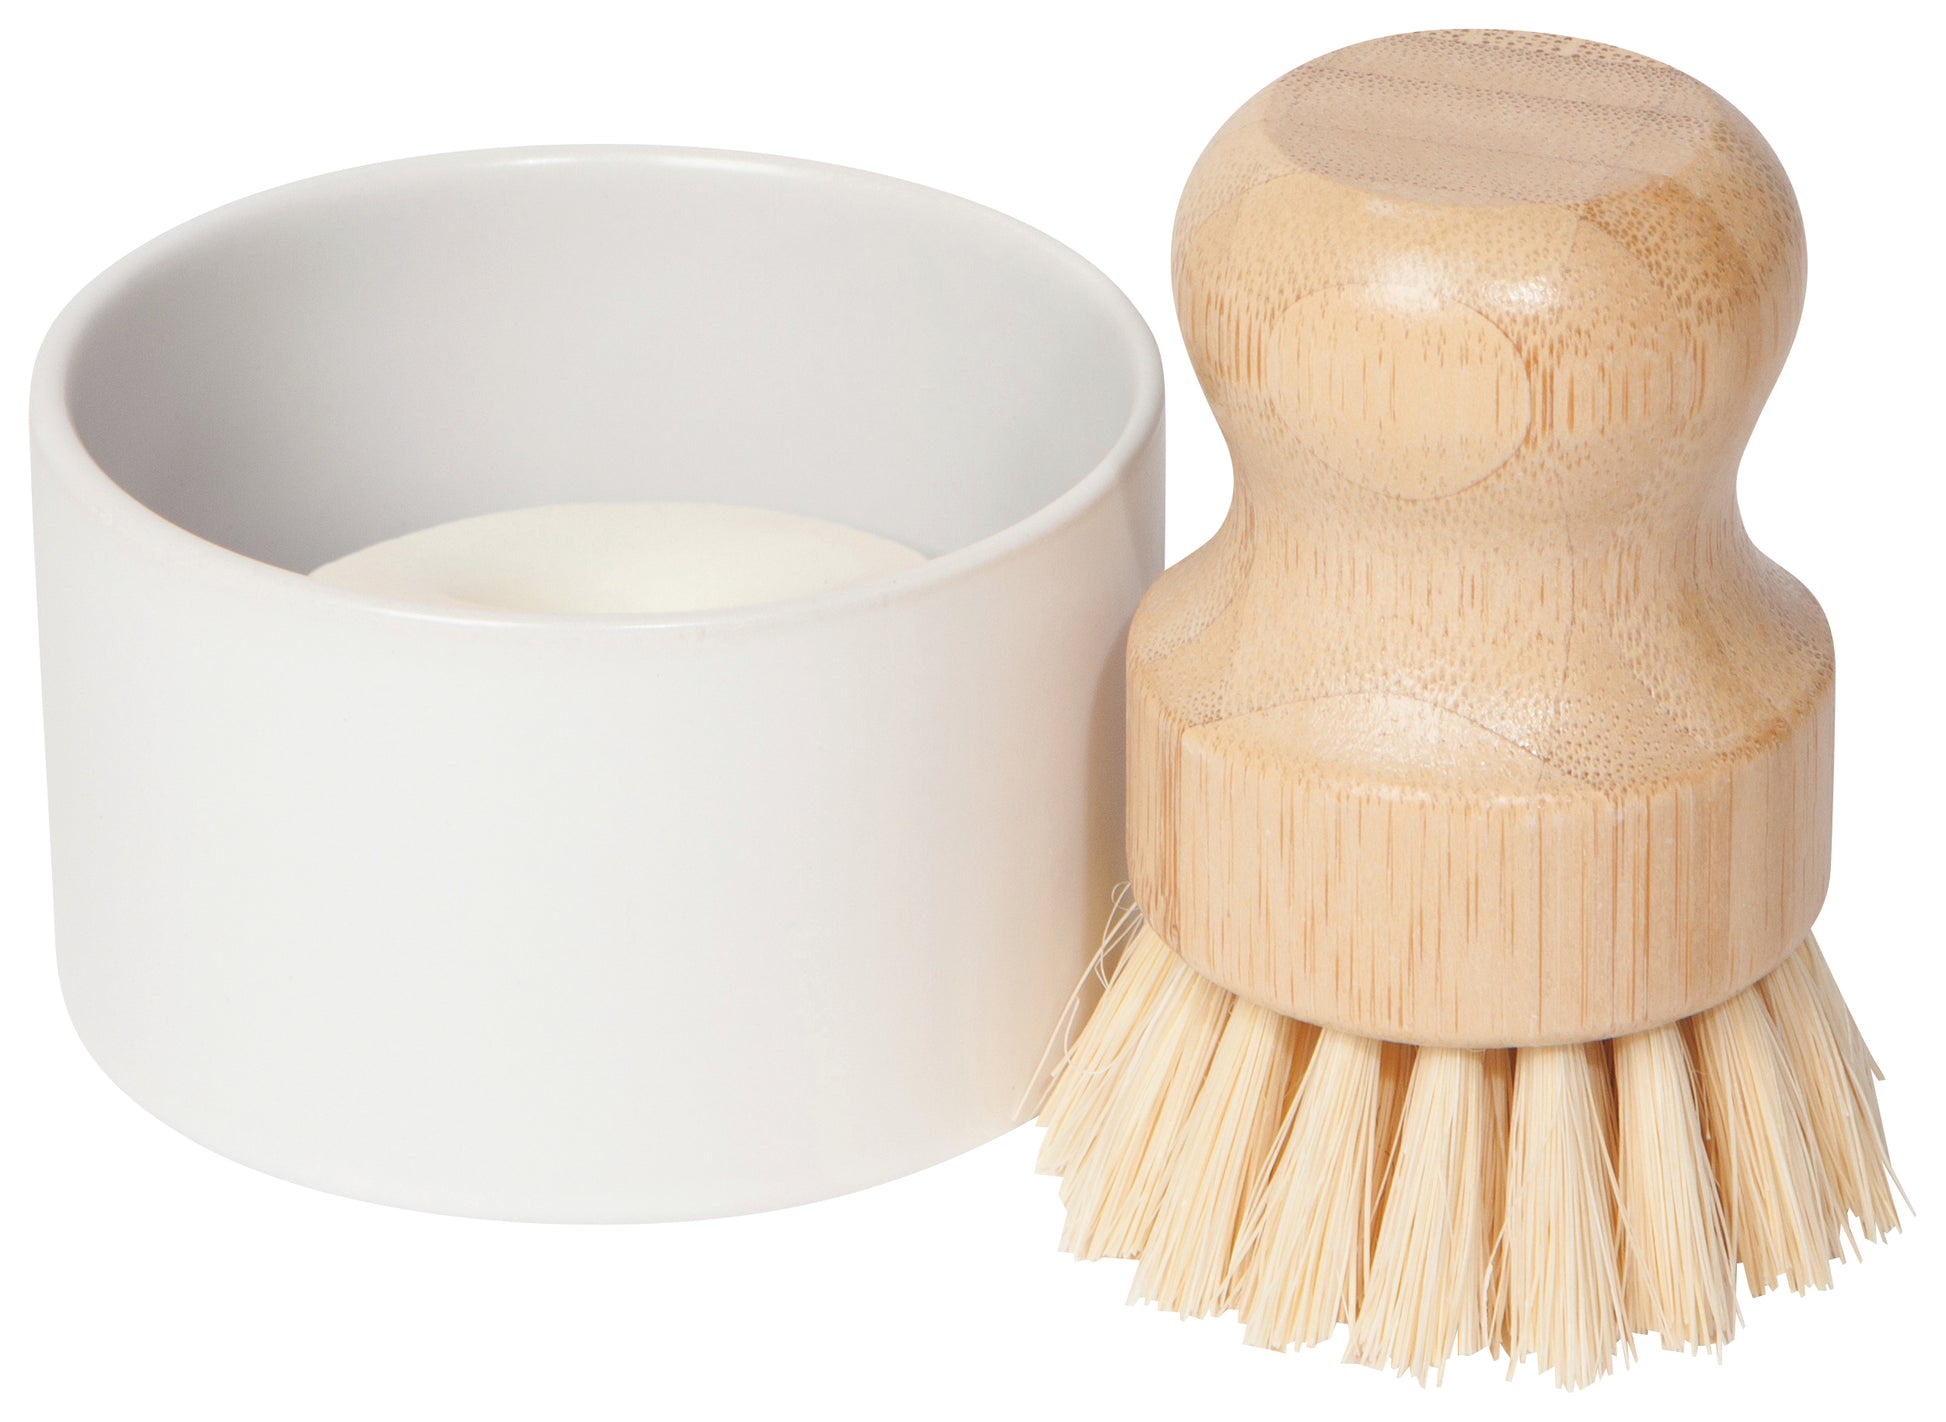 wooden handled scrub brush with white ceramic holder next to it on a white background.